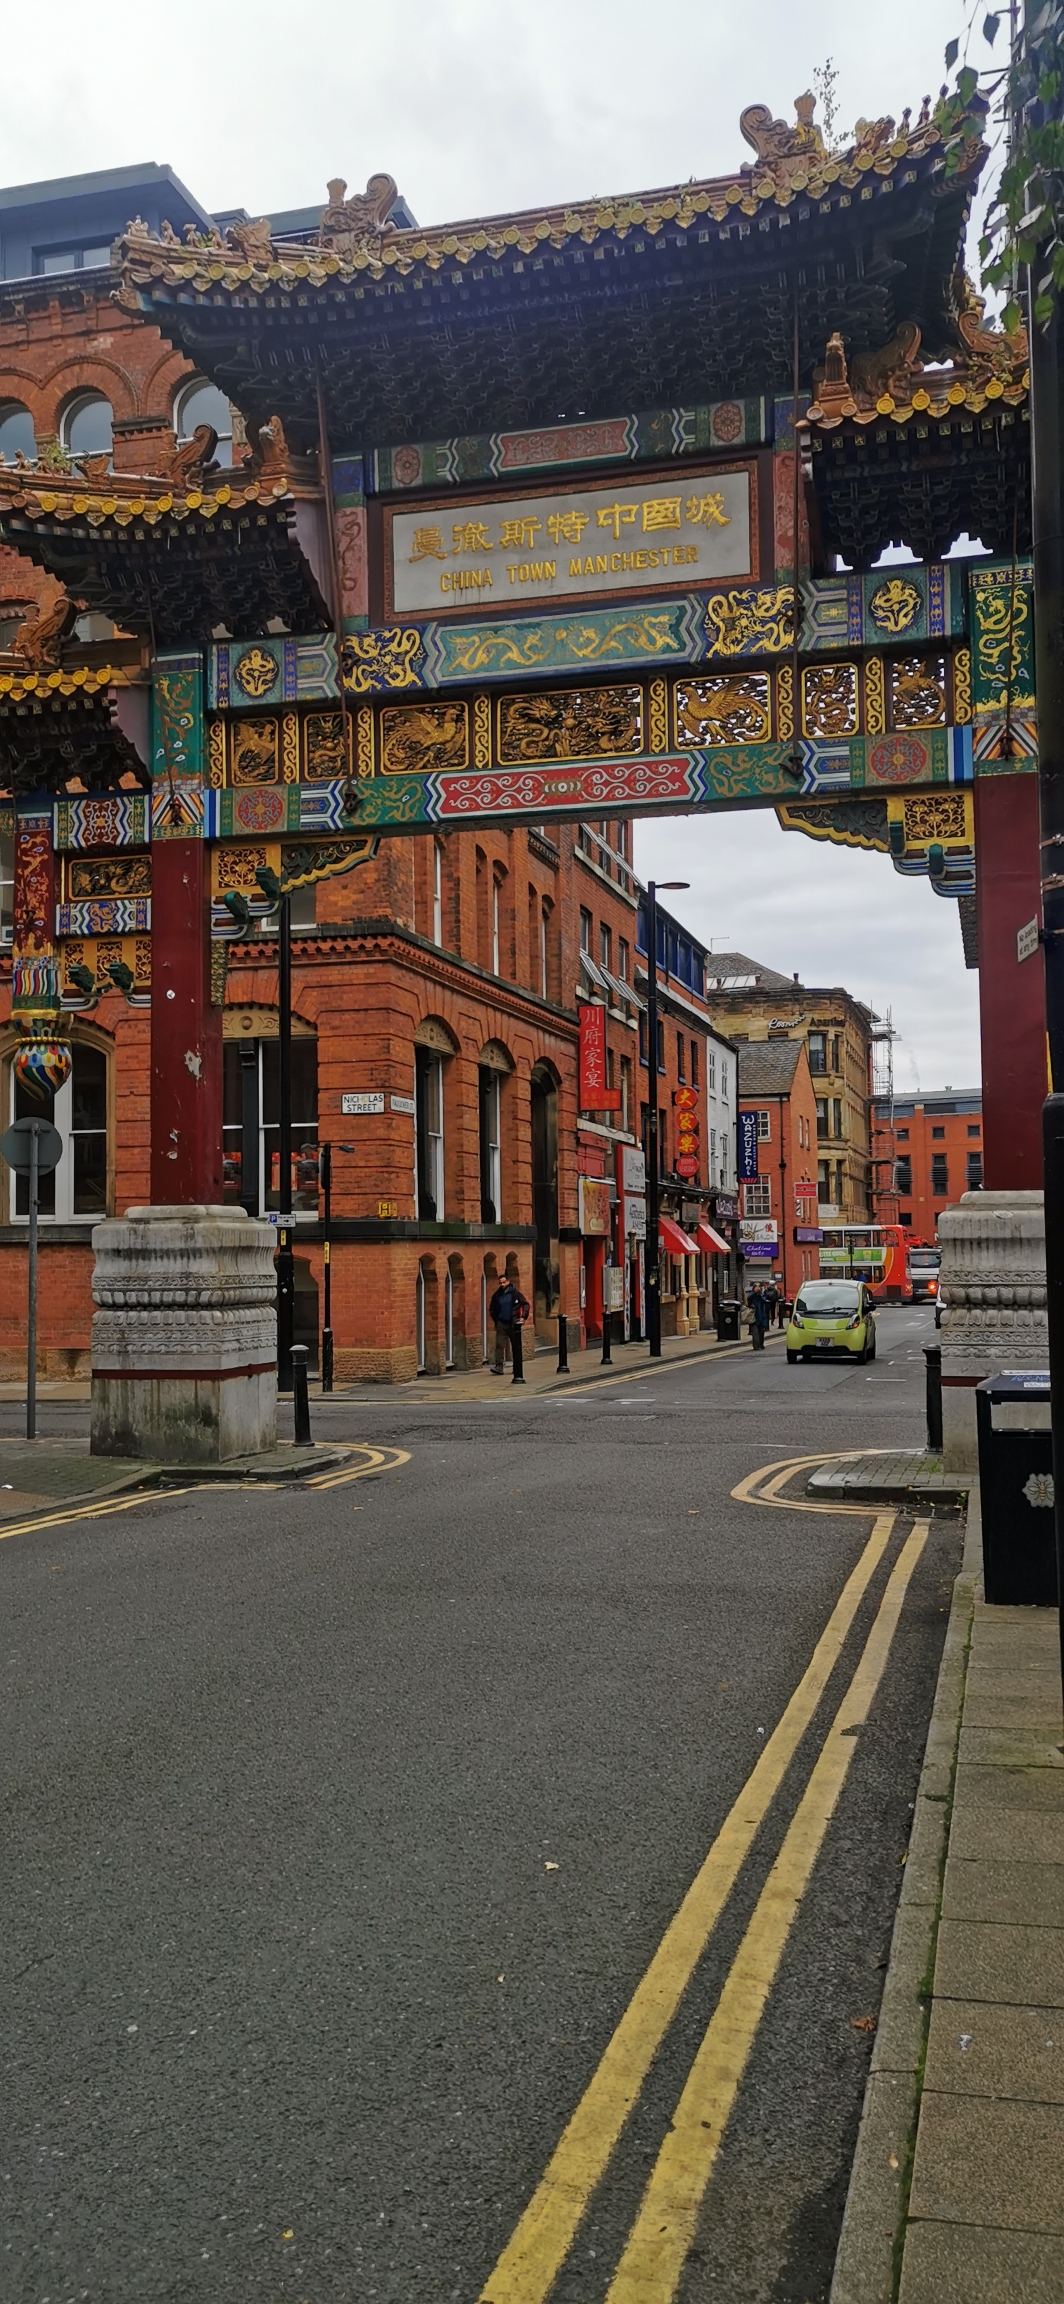 Photo taken between Manchester Art Gallery and China Town